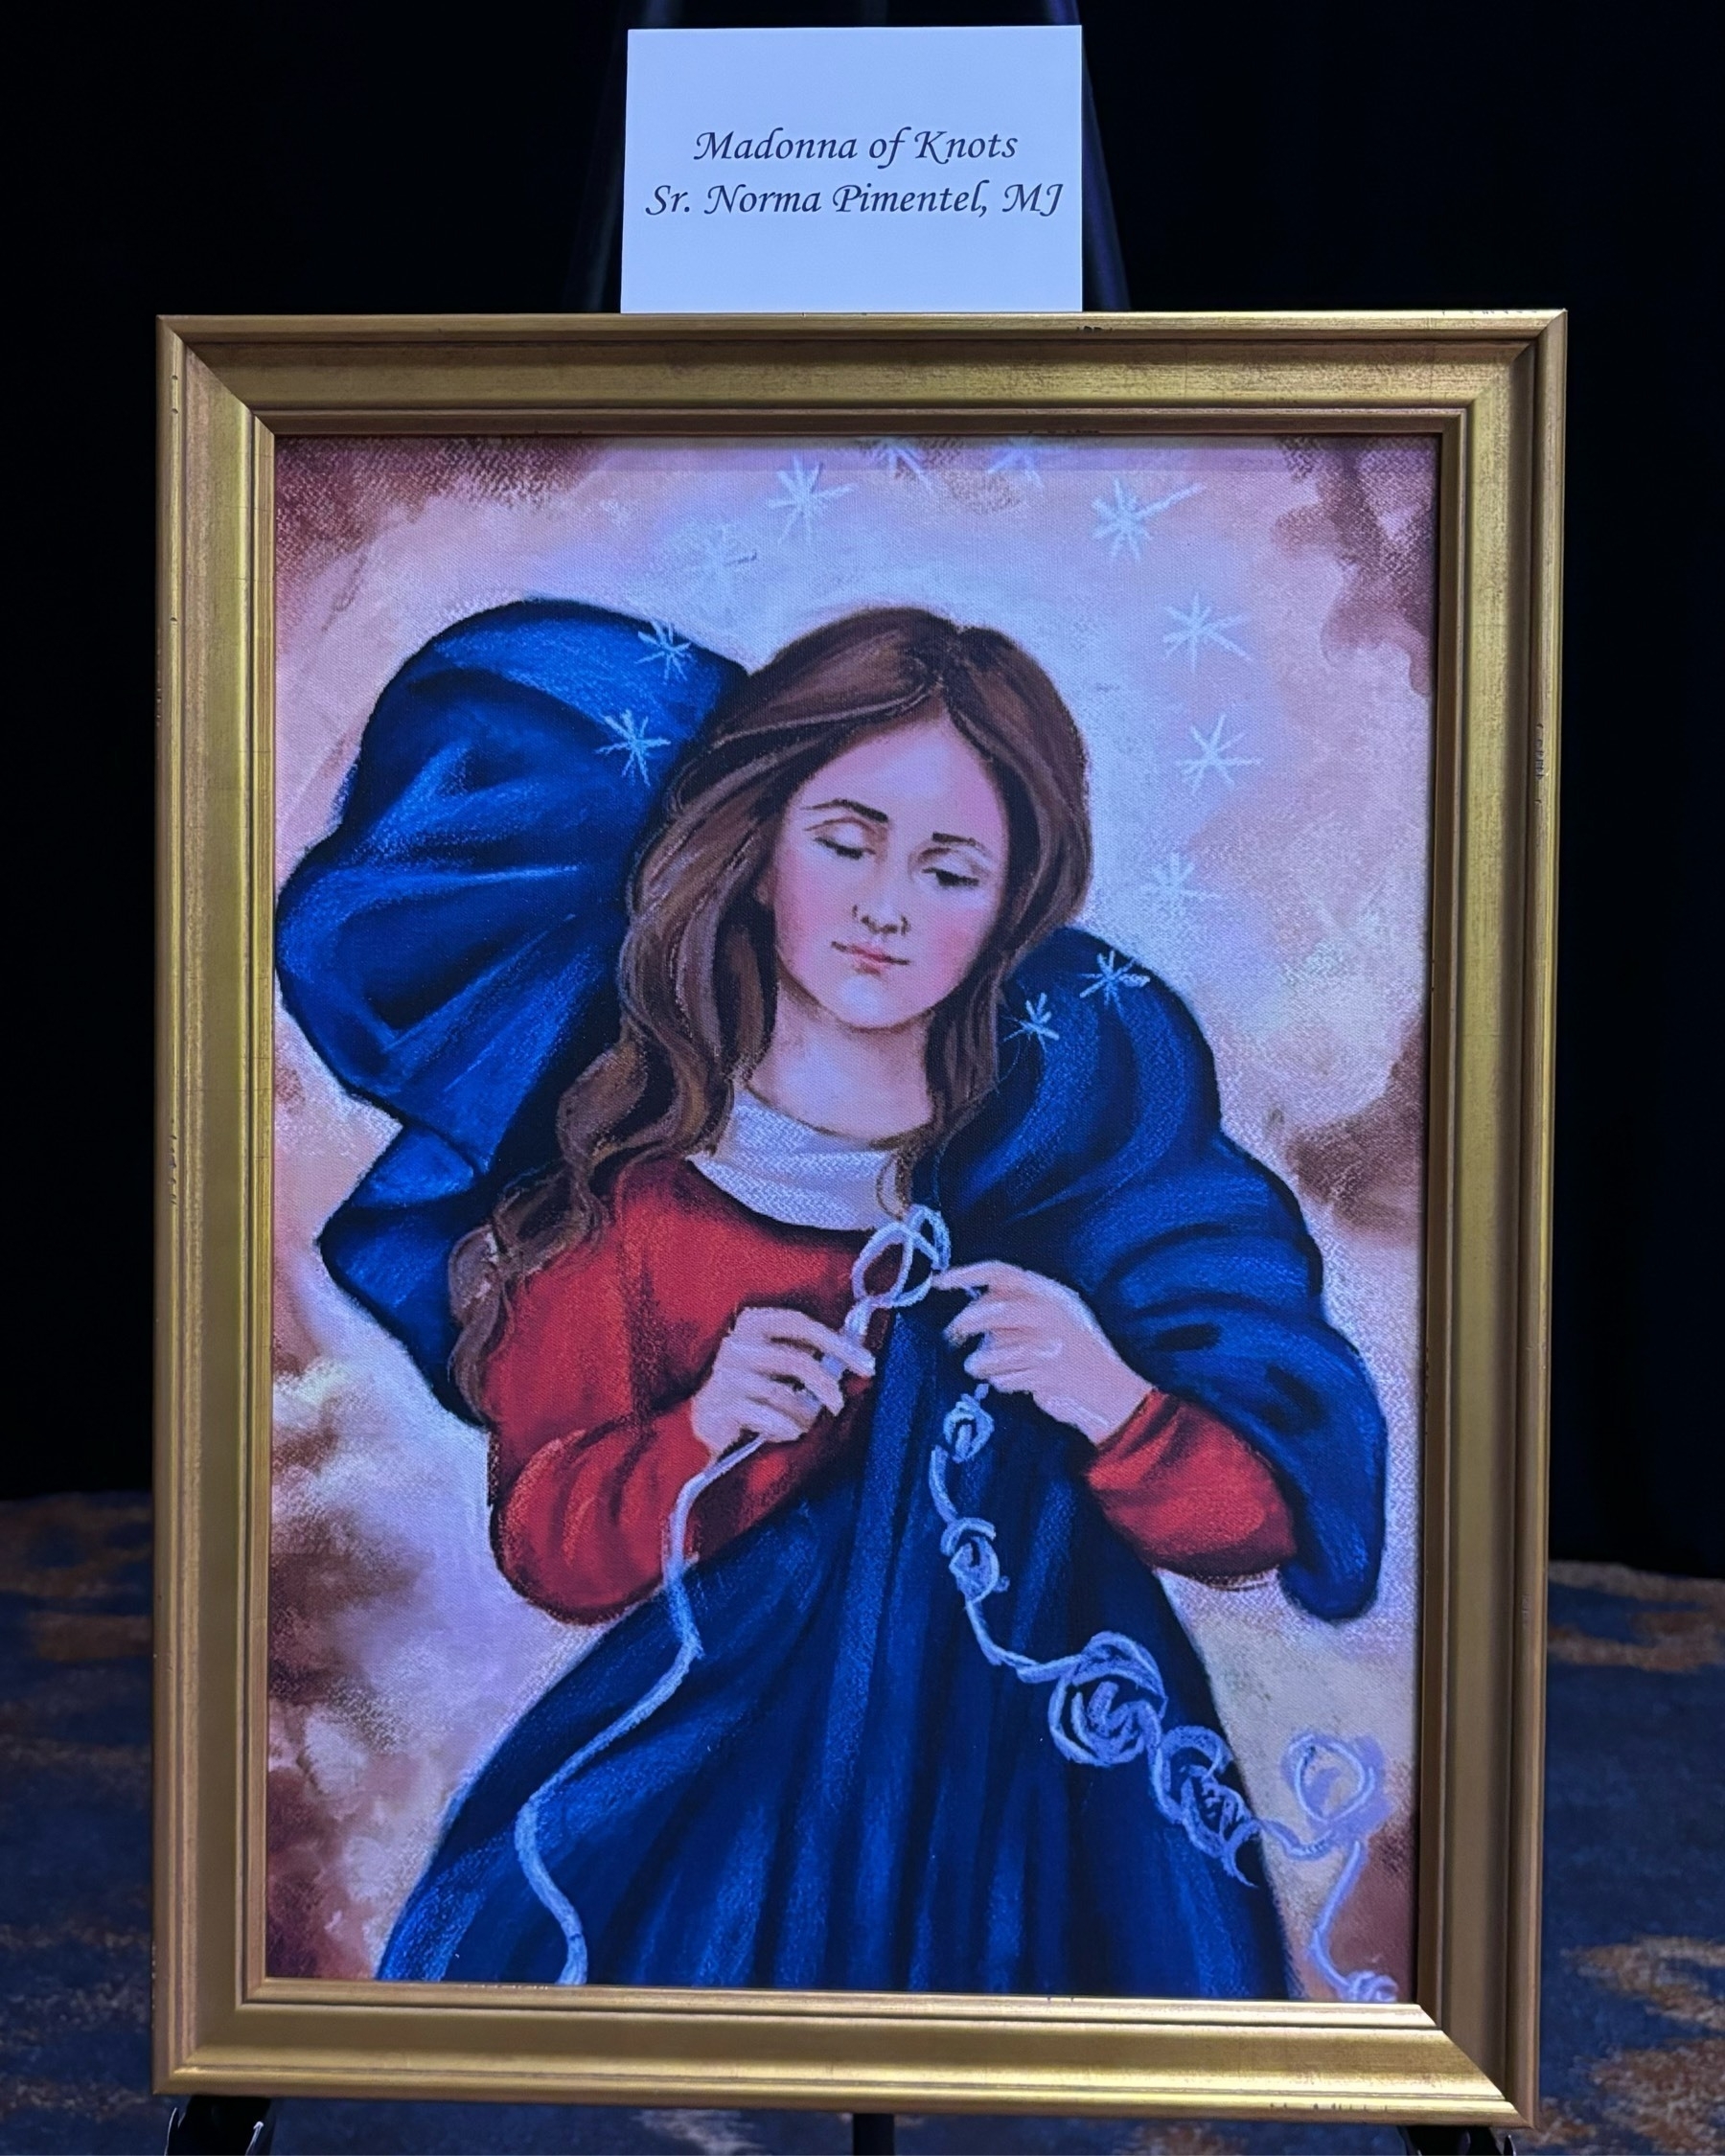 A painting entitled Madonna of Knots, depicting Mary, Mother of God, straightening out a rope. The artist is Sr. Norma Pimentel, MJ.